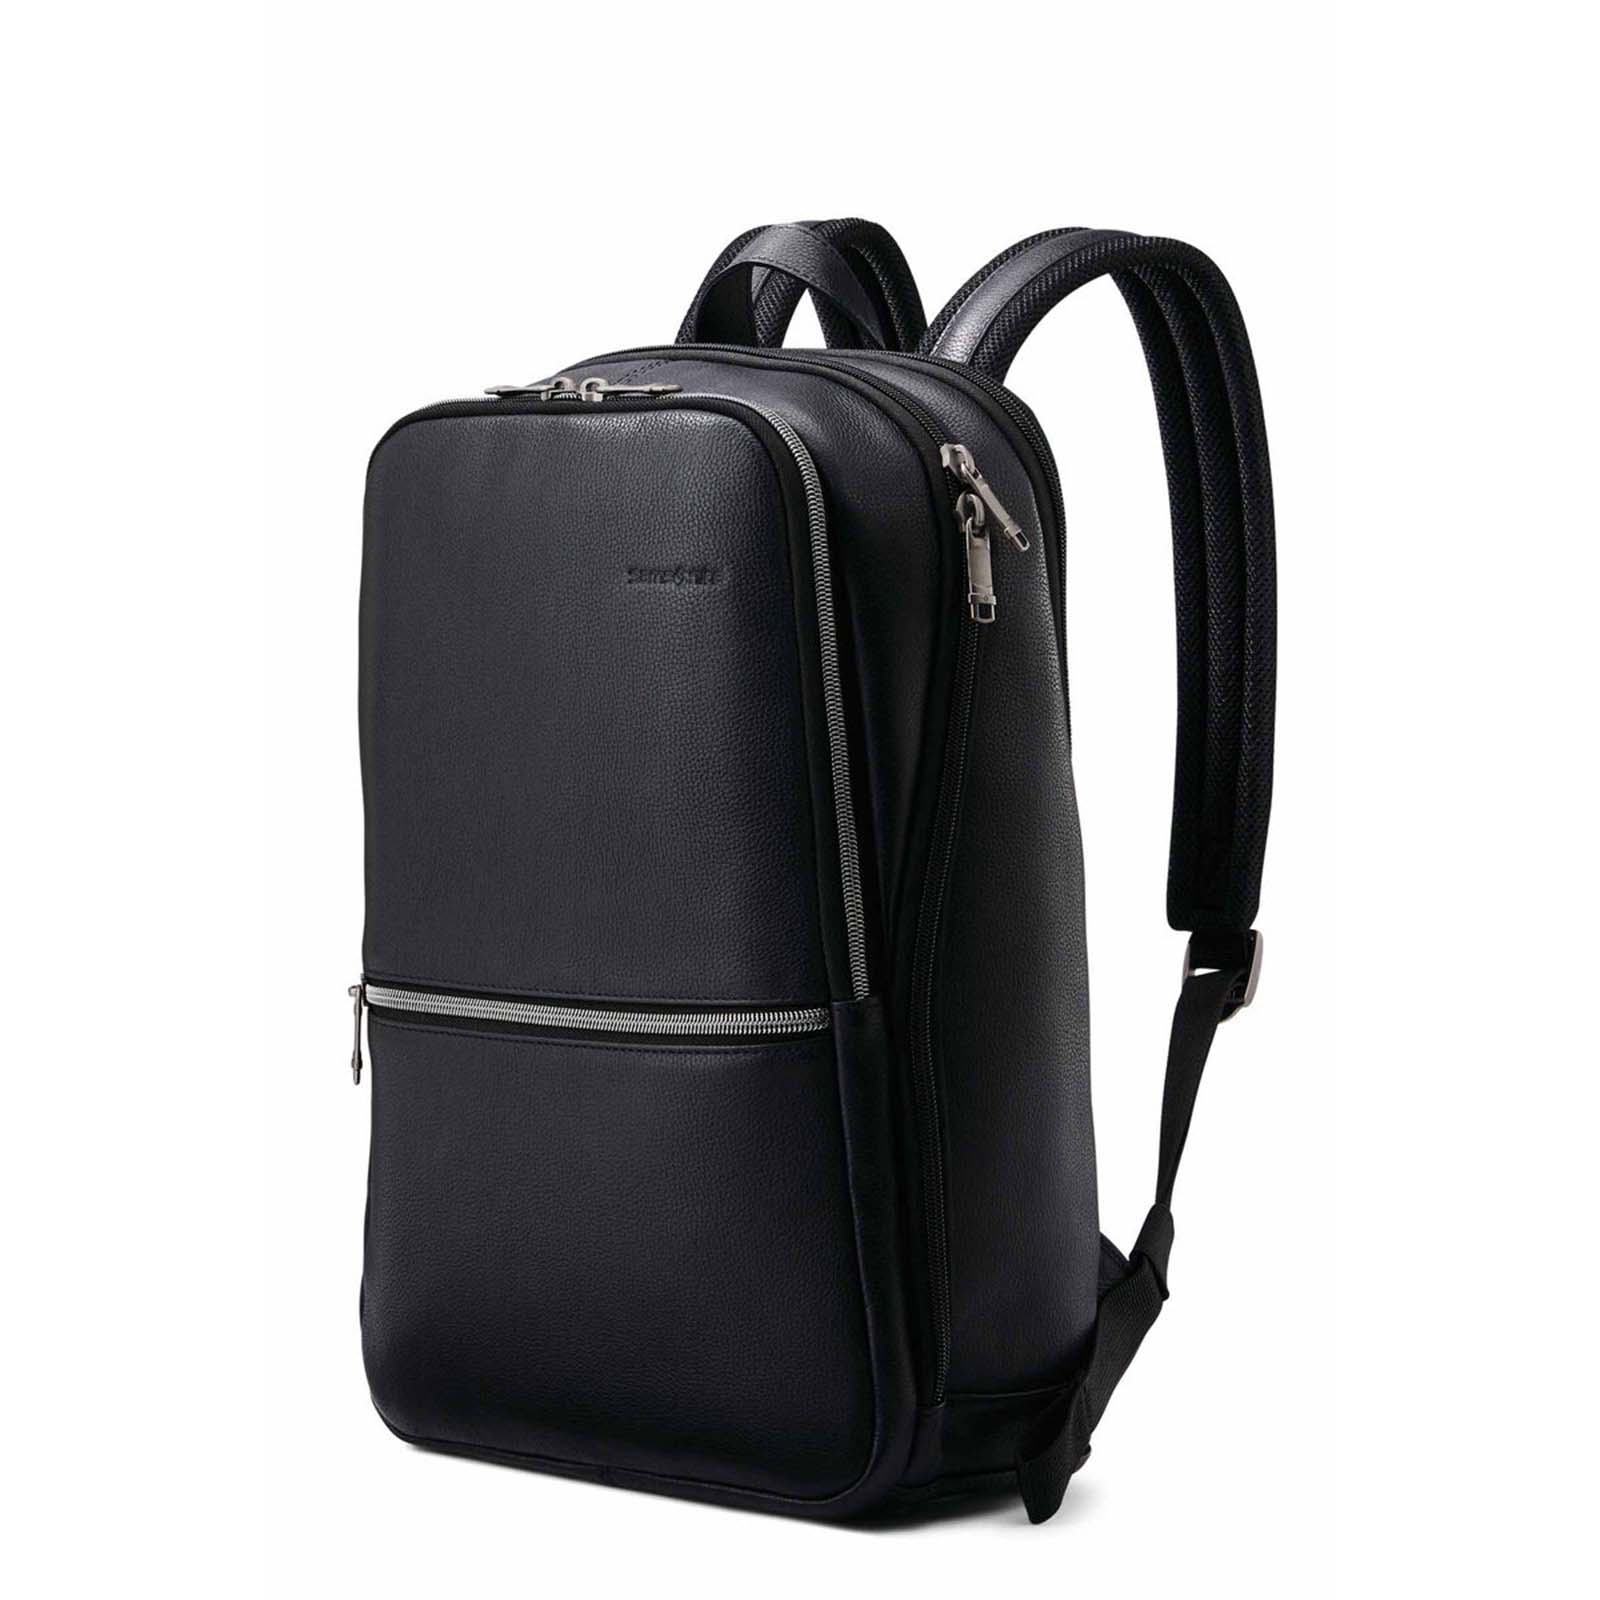 Samsonite-Classic-Leather-14-Inch-Laptop-Backpack-Black-Front-Angle